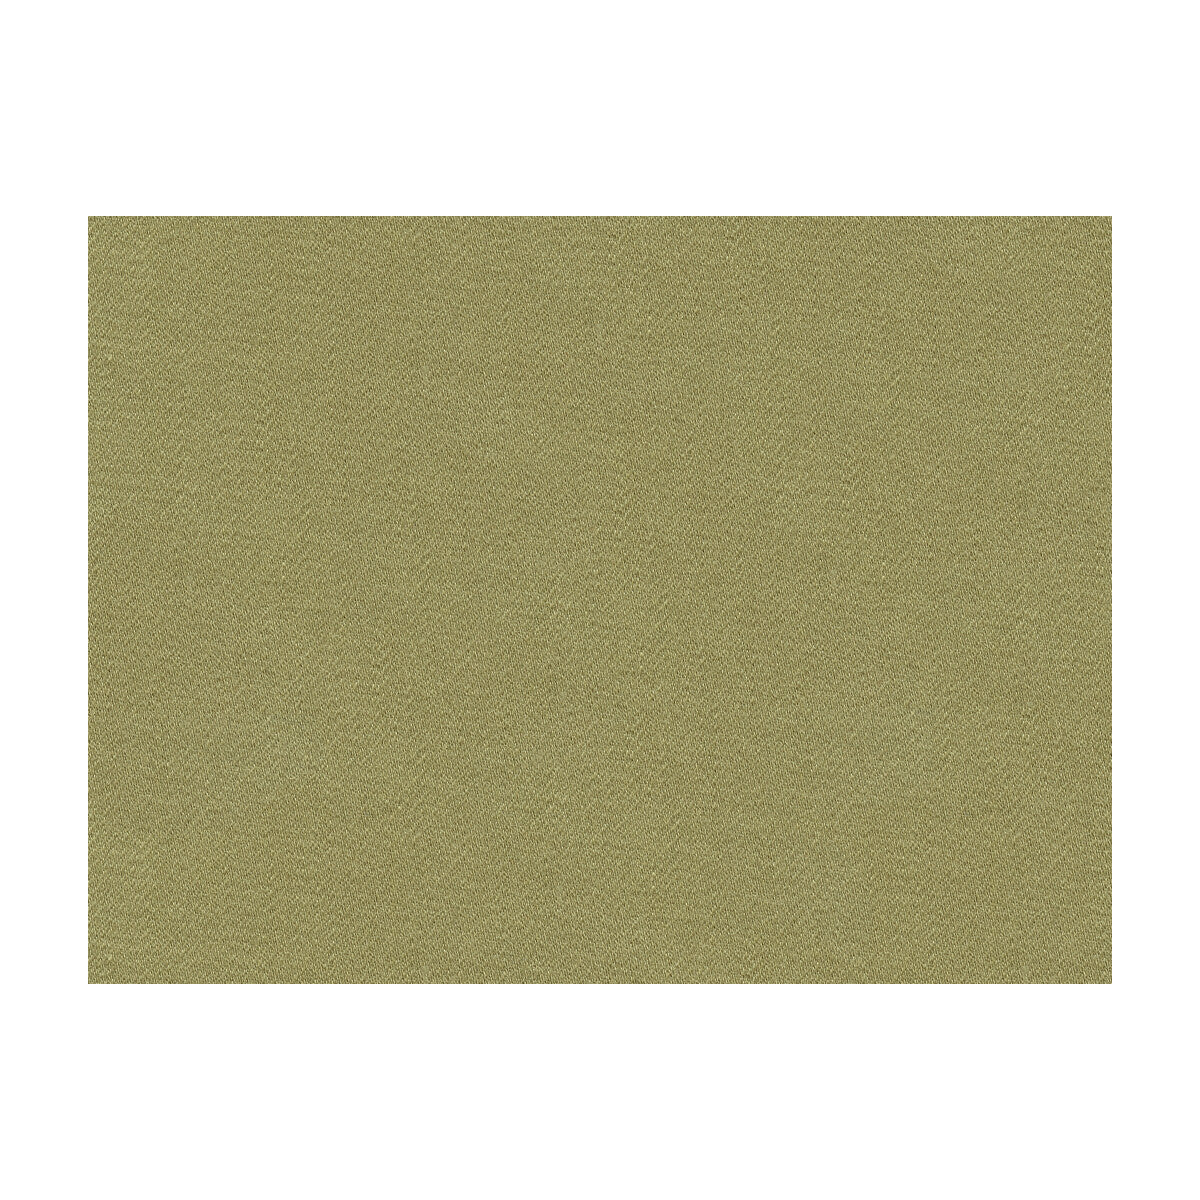 Fyvie Wool Satin fabric in khaki color - pattern BR-89768.459.0 - by Brunschwig &amp; Fils